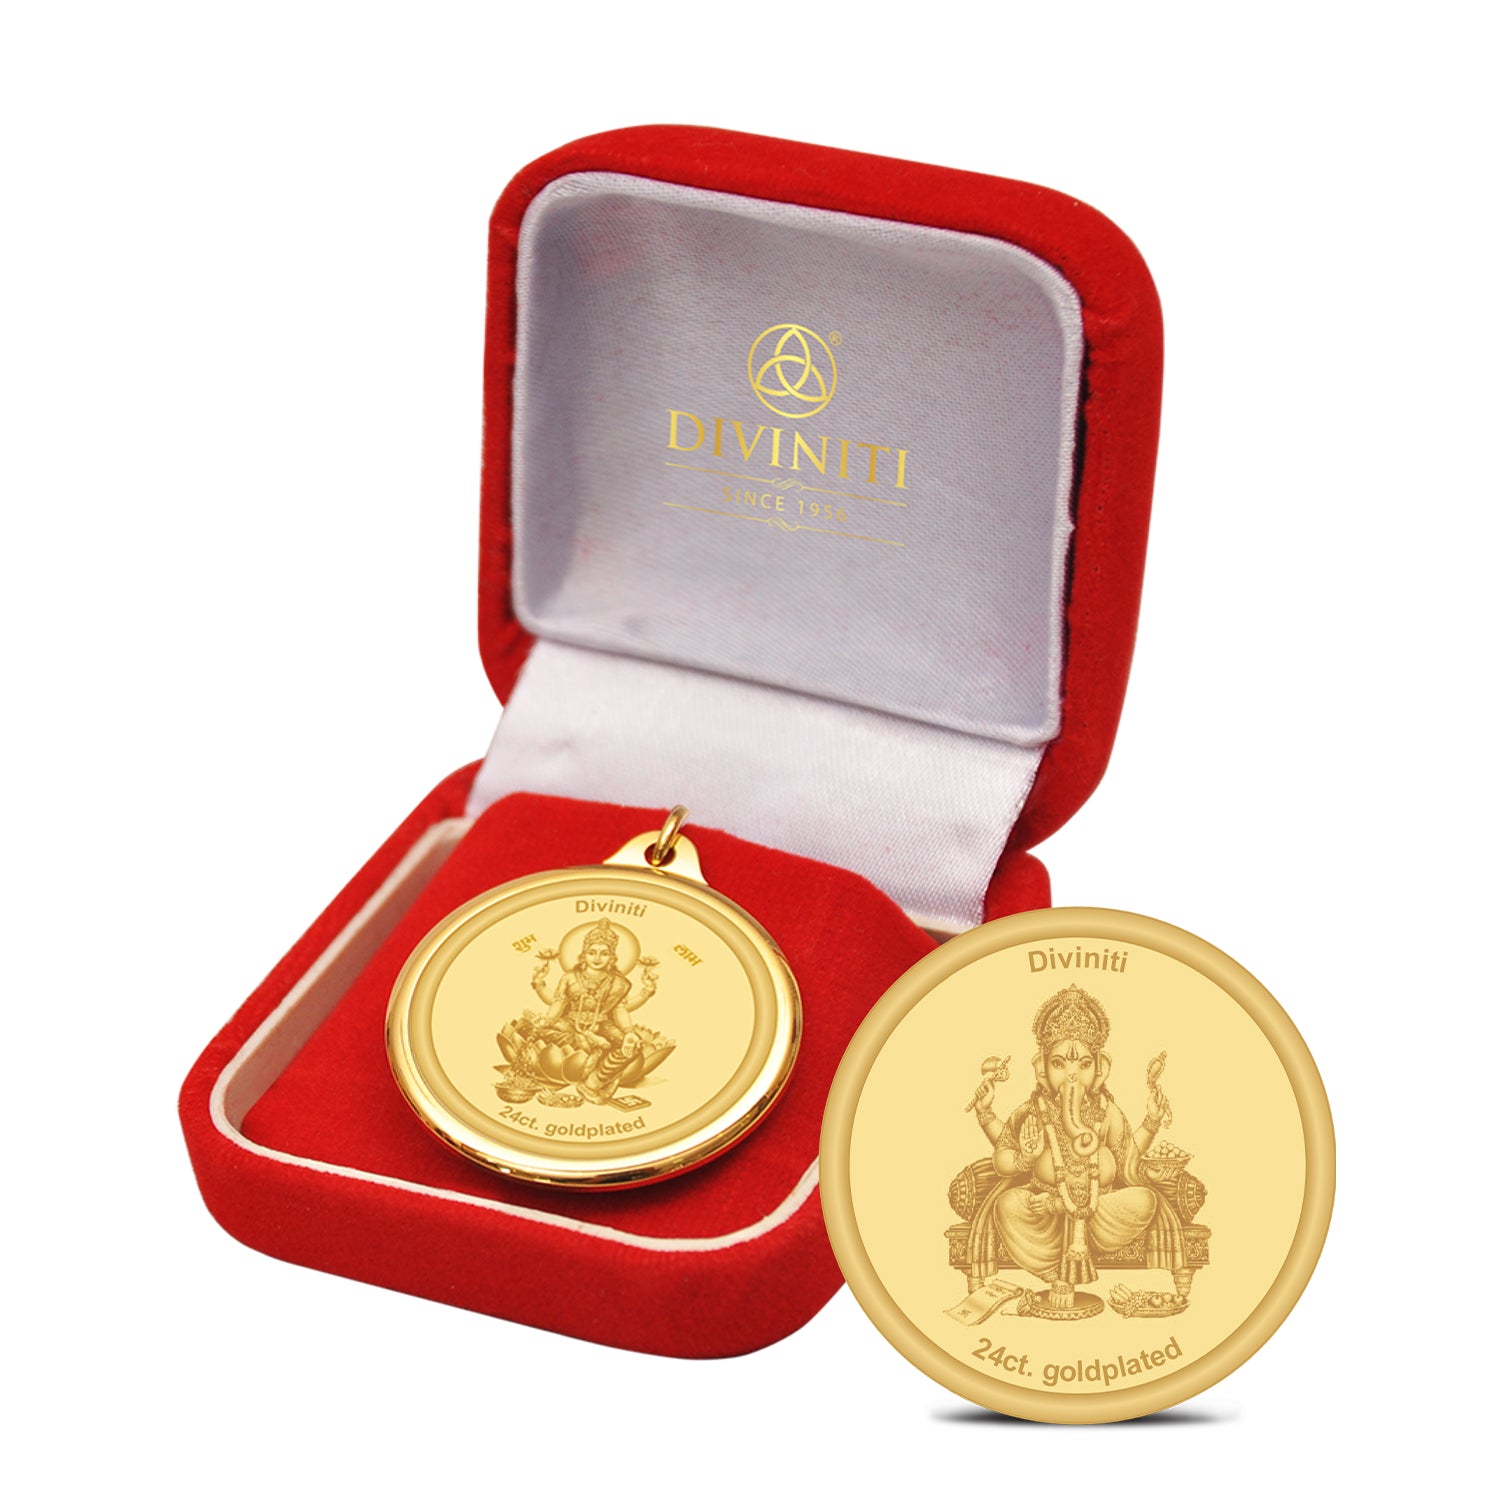 RELBEES German Silver Coin With Exclusive Box for Diwali Gift items/Diwali  Gifts/Corporate/Birthday/Anniversary/Wedding Gifts for Friends and  Family,Staff,Employees () : Amazon.in: Jewellery